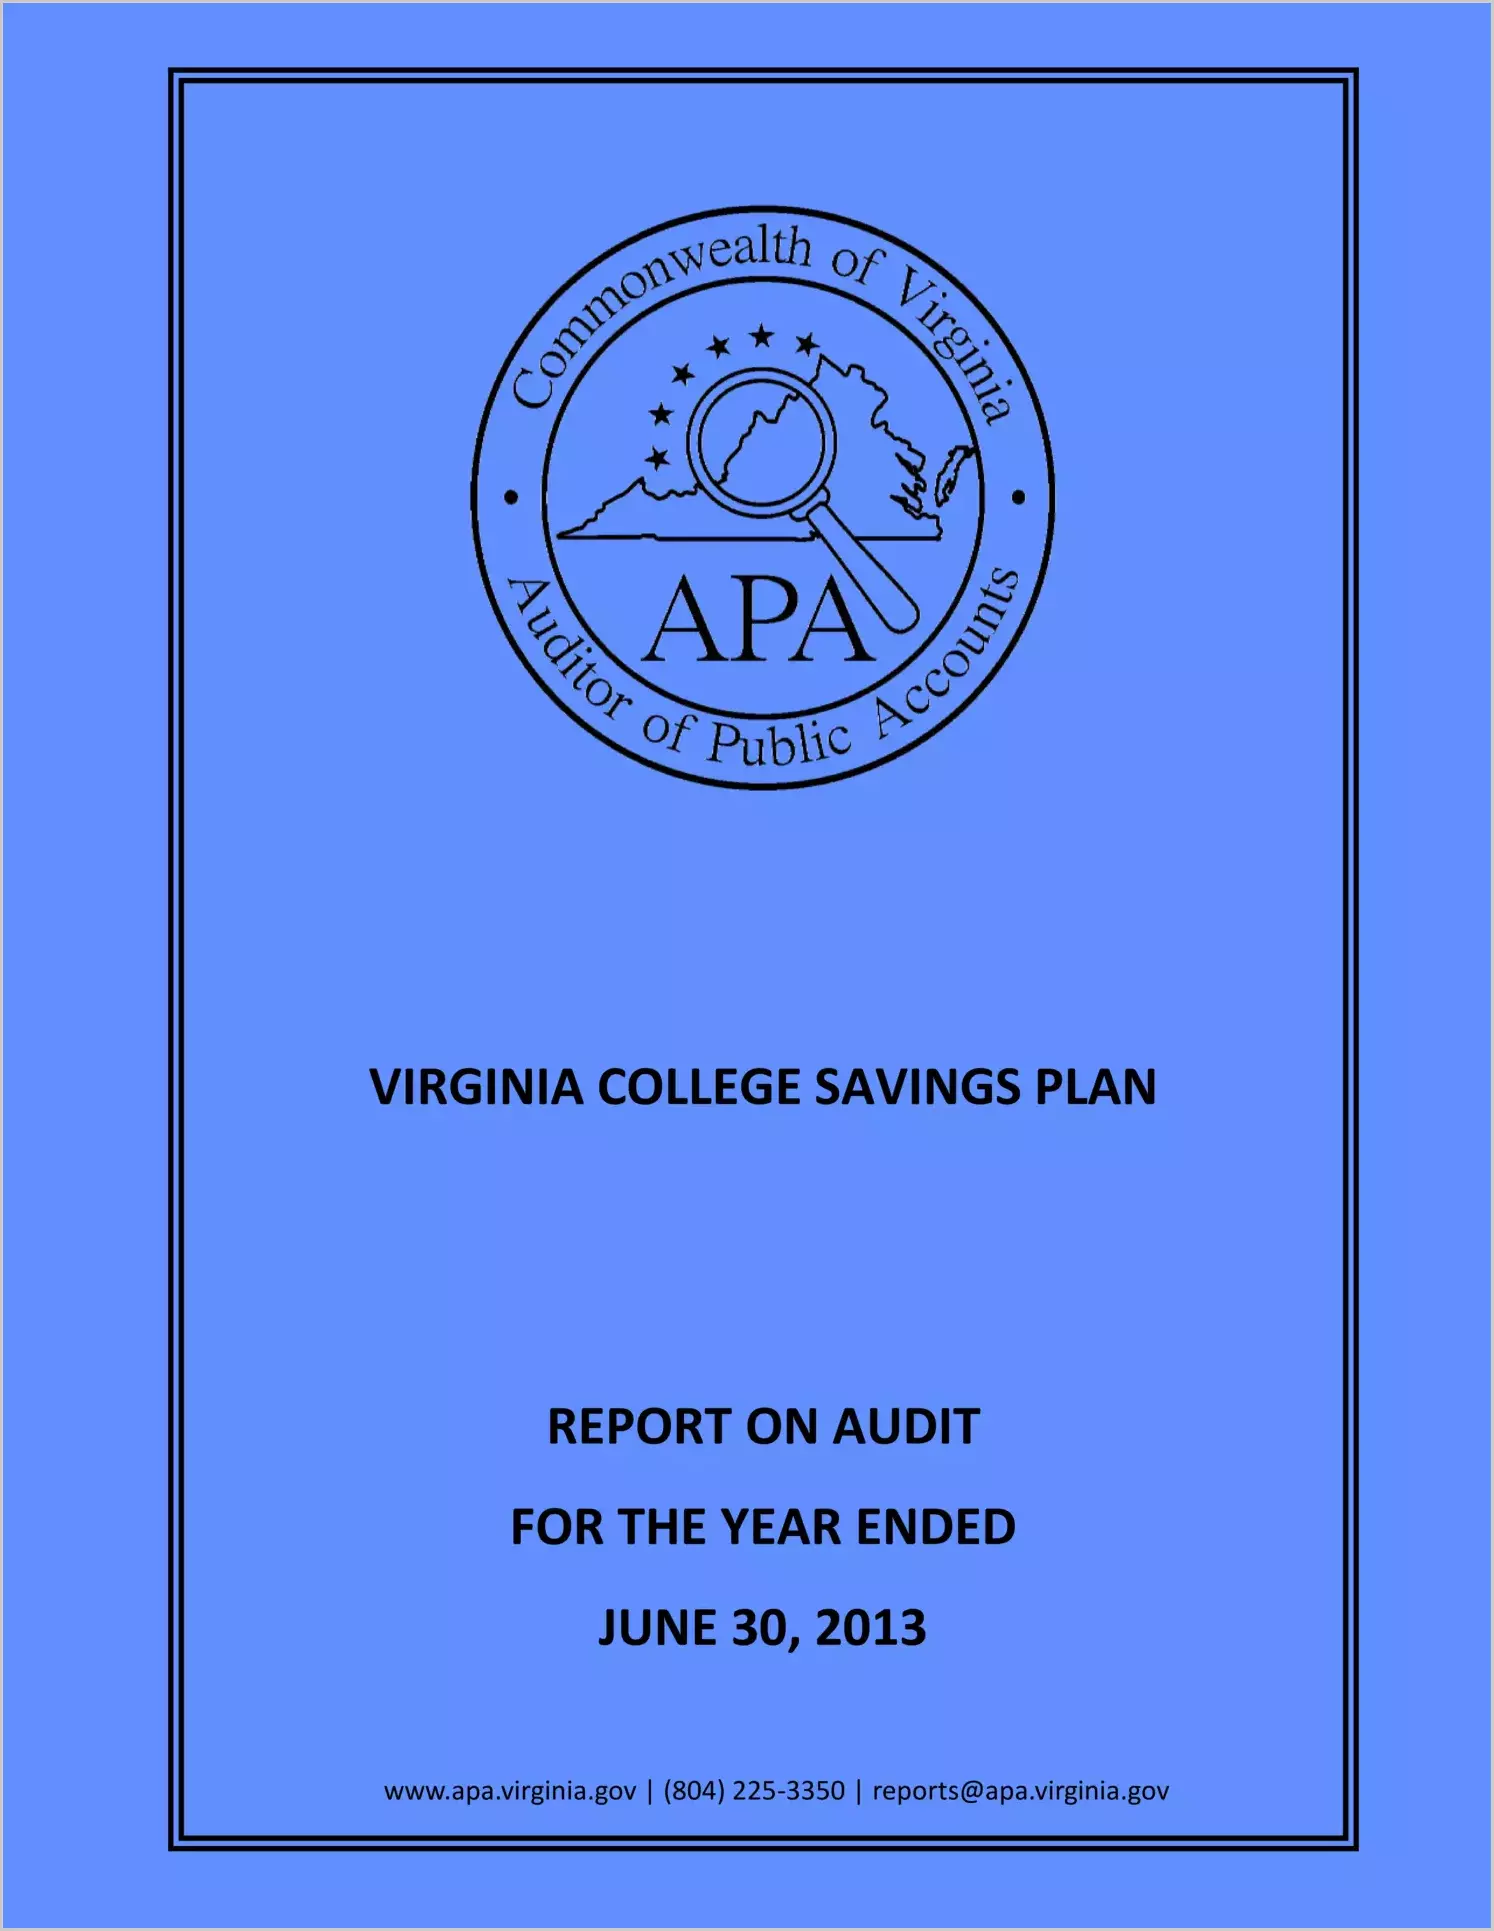 Virginia College Savings Plan for the year ended June 30, 2013